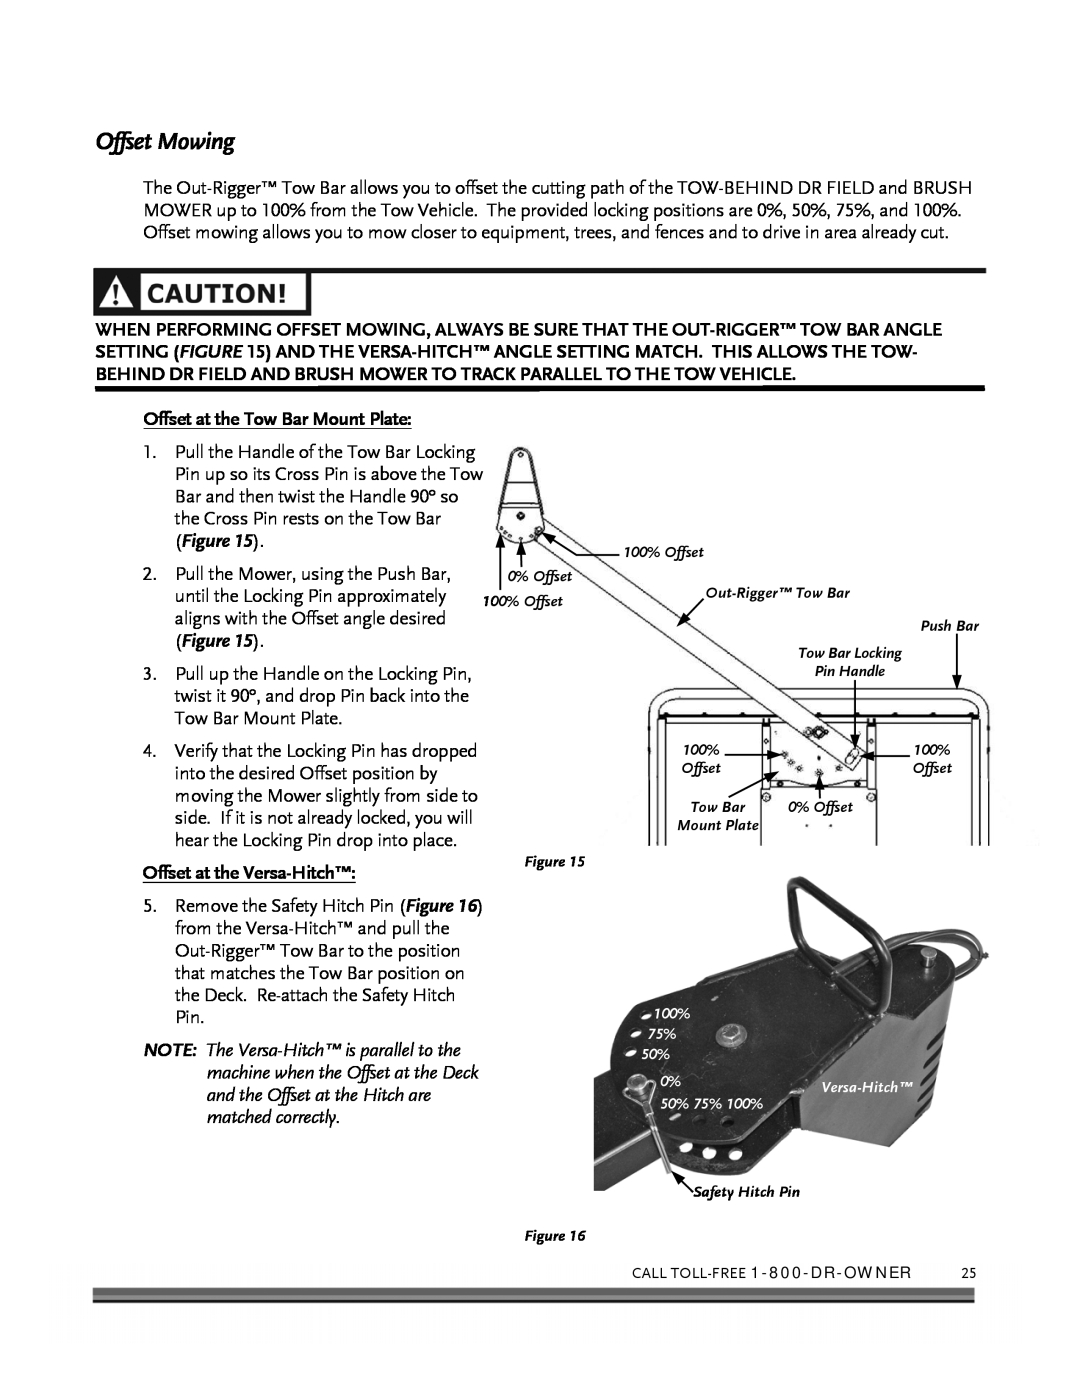 Briggs & Stratton FIELD and BRUSH MOWER manual Offset Mowing, Offset at the Tow Bar Mount Plate, Offset at the Versa-Hitch 